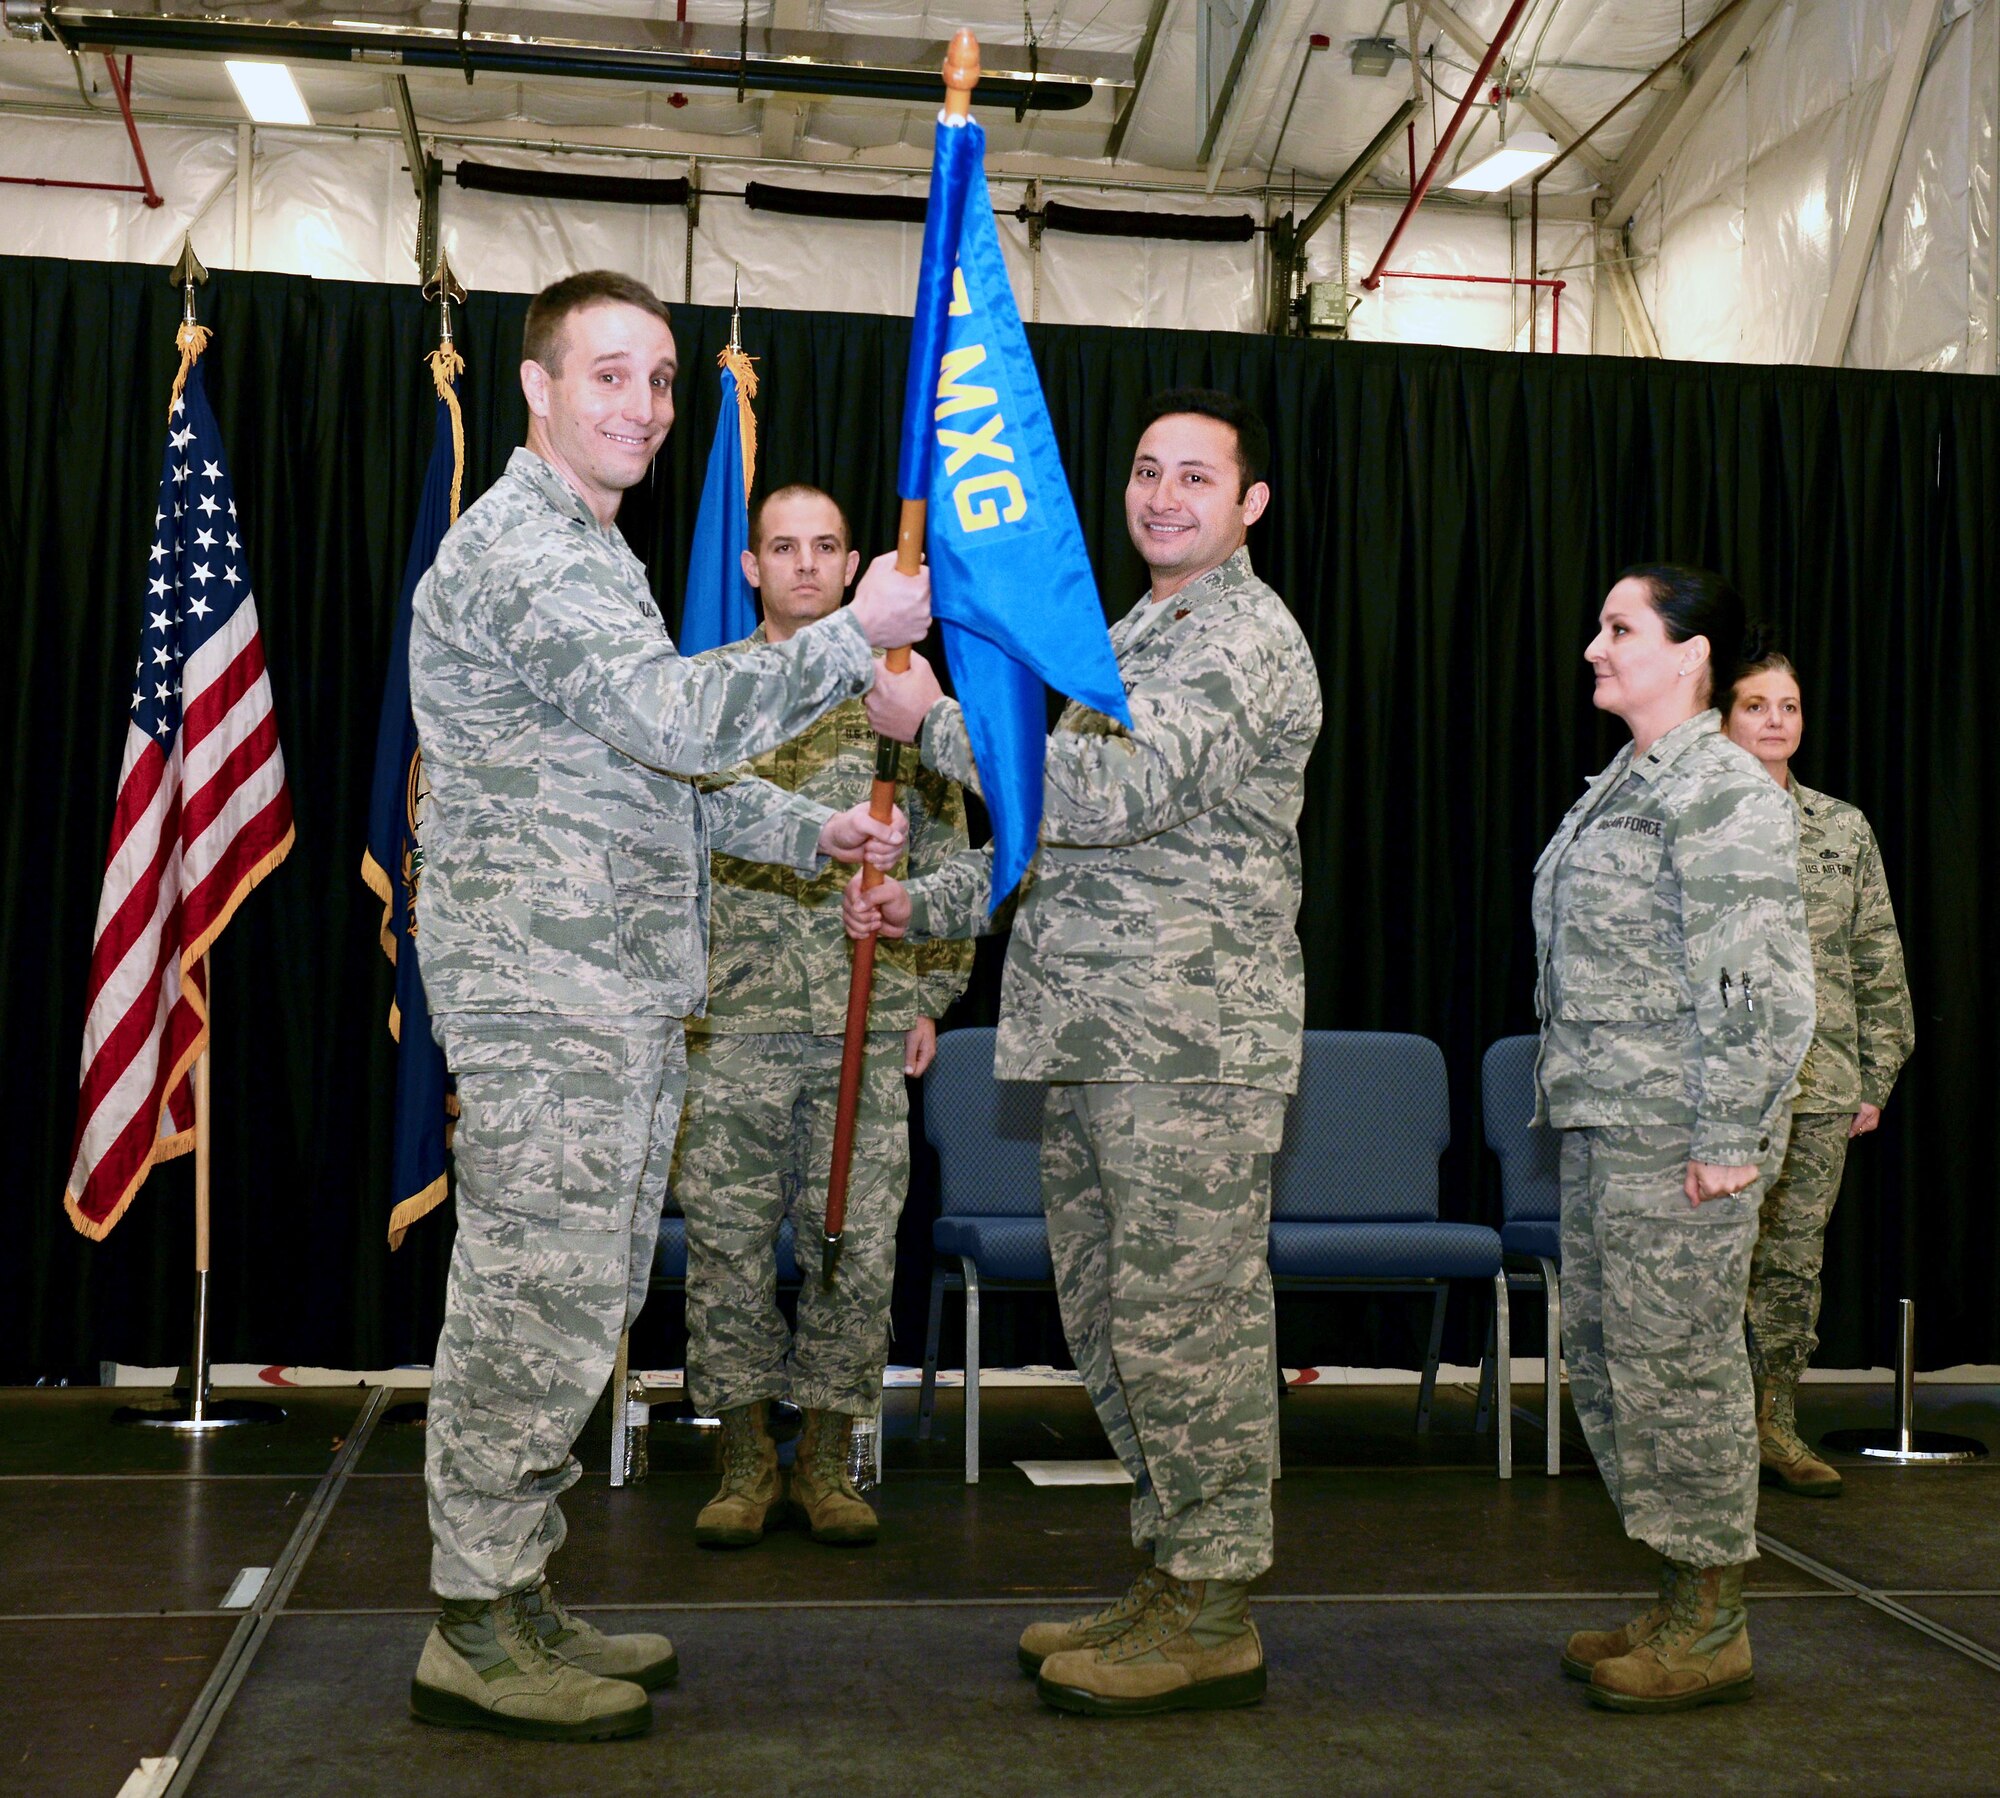 Lt. Col. Brian R. Jusseaume, commander of the 157th Maintenace Group, passes the 157th MXG guidon to Maj. Nicolas S. Alcocer during a change of command ceremony on December 2, 2017, at Pease Air National Guard Base, N.H. Alcocer took commmand of the 157th Maintenance Operations Flight. (N.H. Air National Guard photo by Staff Sgt. Kayla Rorick)